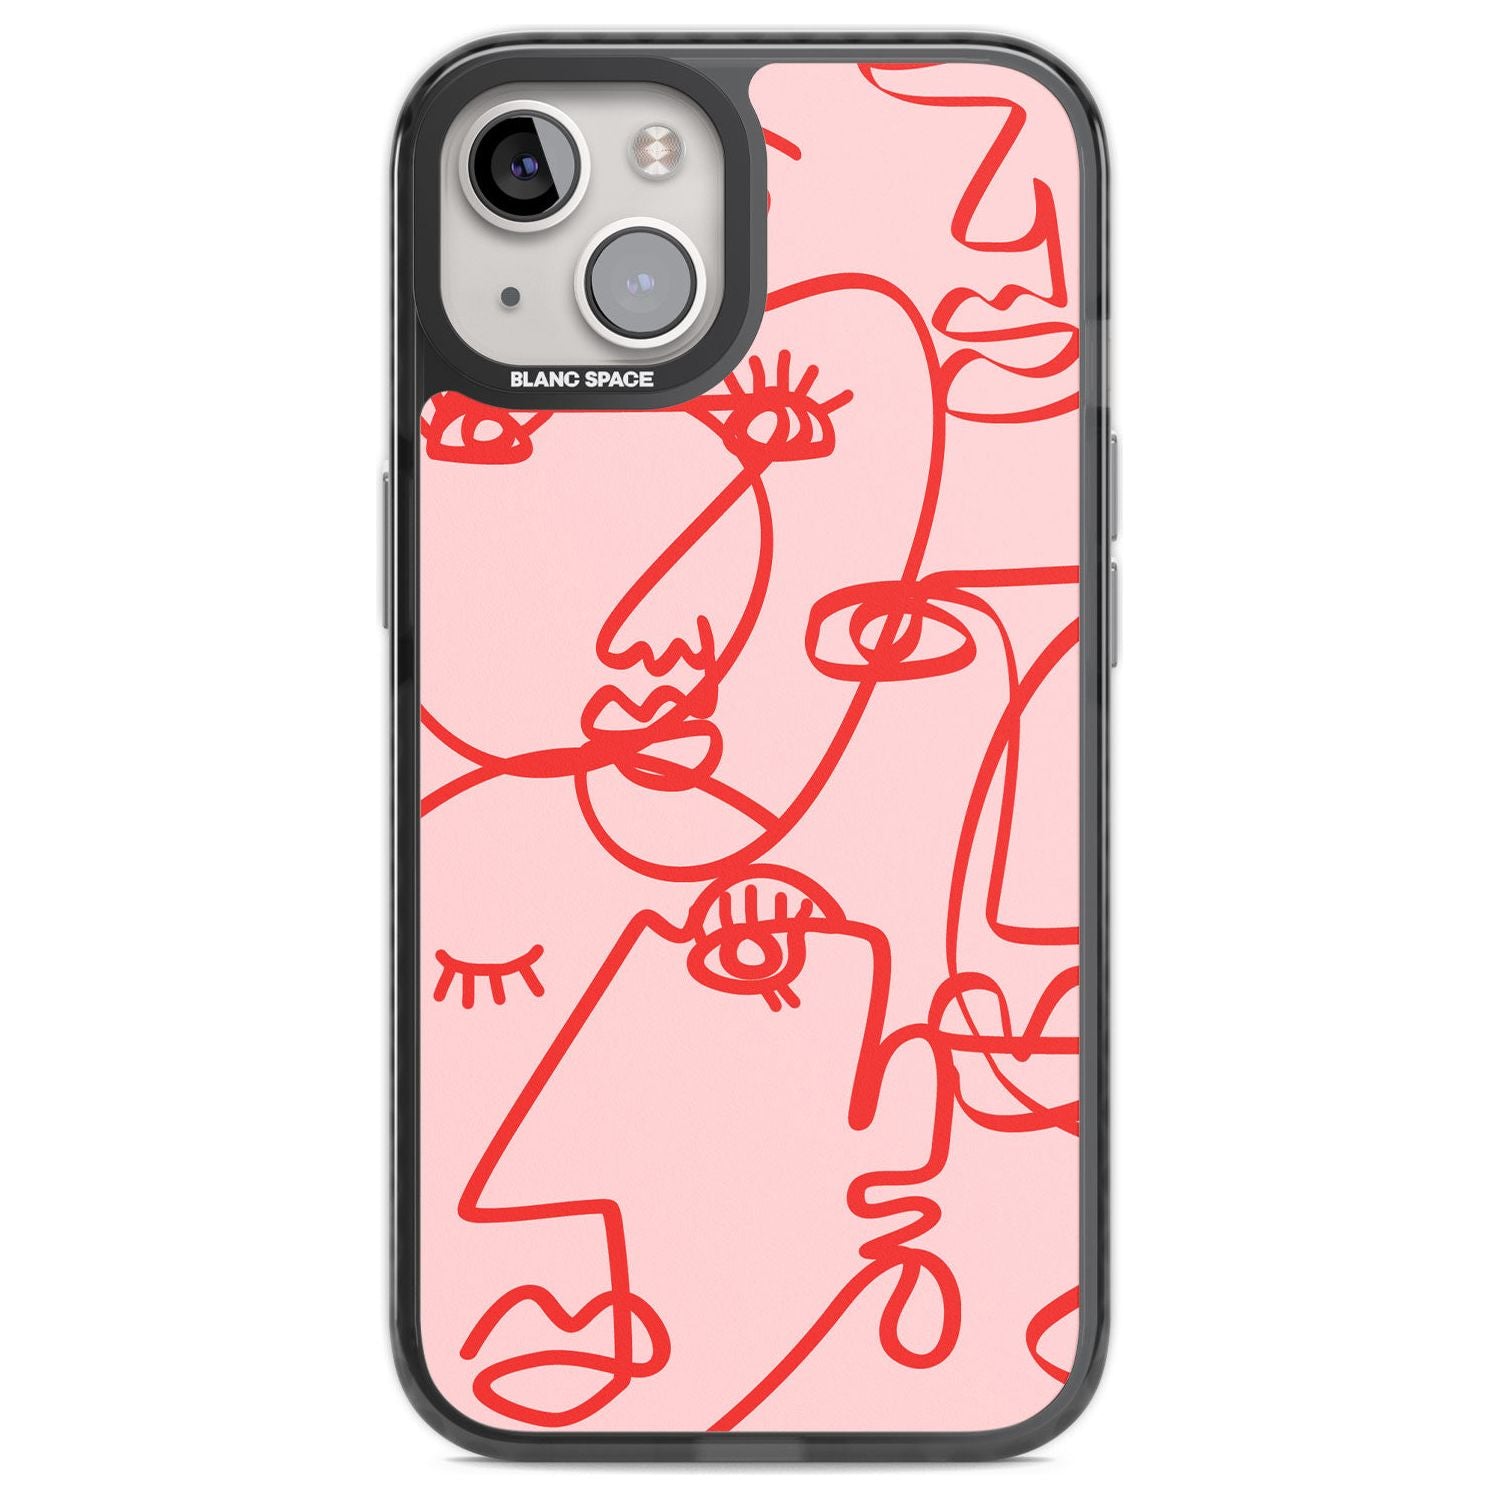 Abstract Continuous Line Faces Red on Pink Phone Case iPhone 12 / Black Impact Case,iPhone 13 / Black Impact Case,iPhone 12 Pro / Black Impact Case,iPhone 14 / Black Impact Case,iPhone 15 Plus / Black Impact Case,iPhone 15 / Black Impact Case Blanc Space